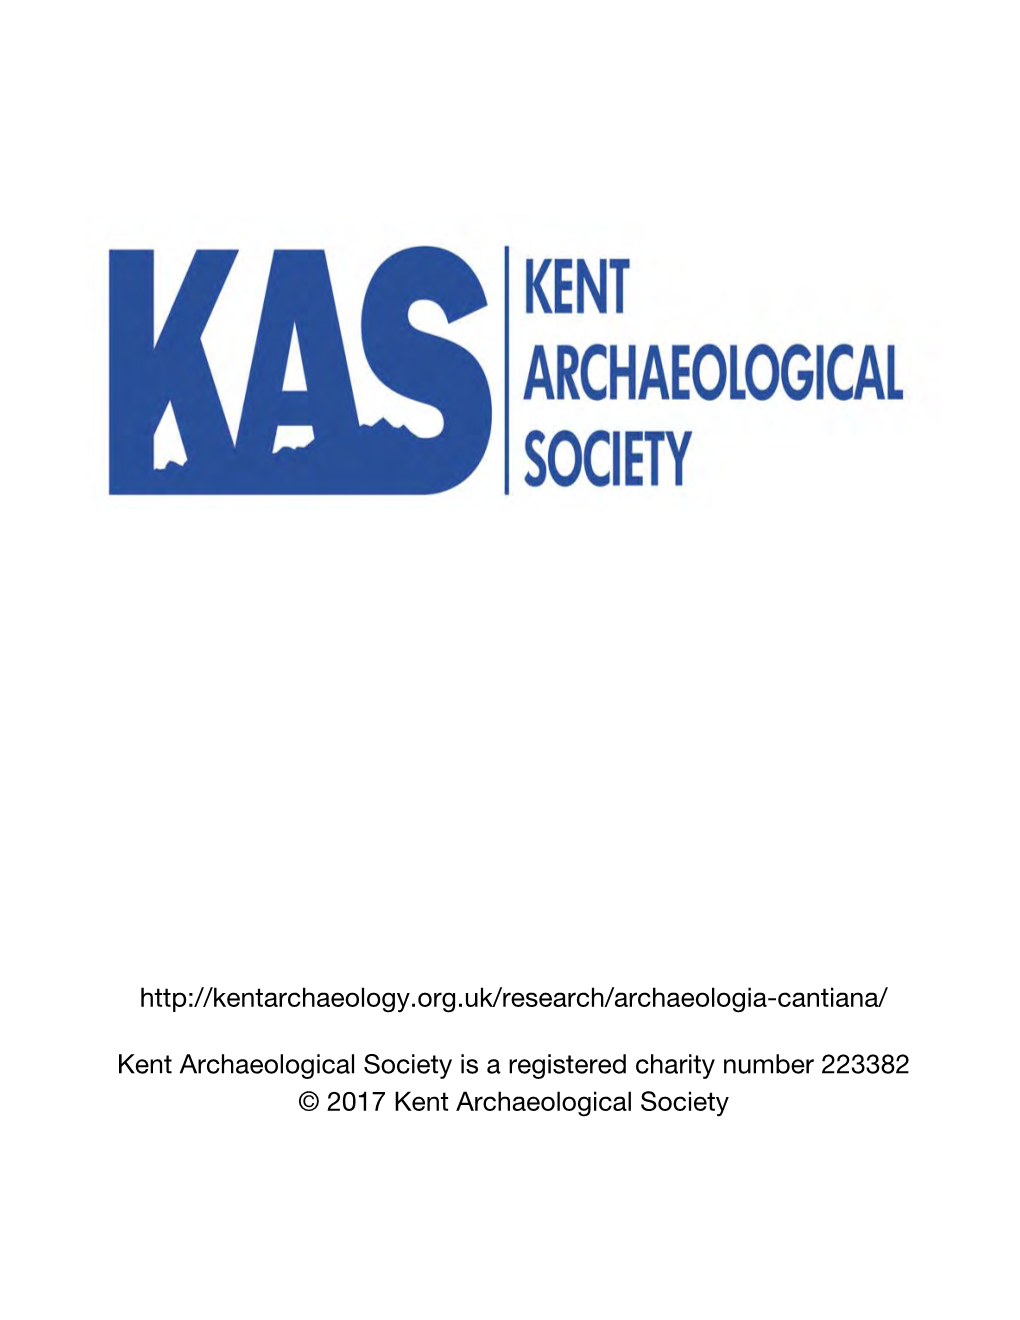 Annual Bibliography of Kentish Archaeology and History 2014